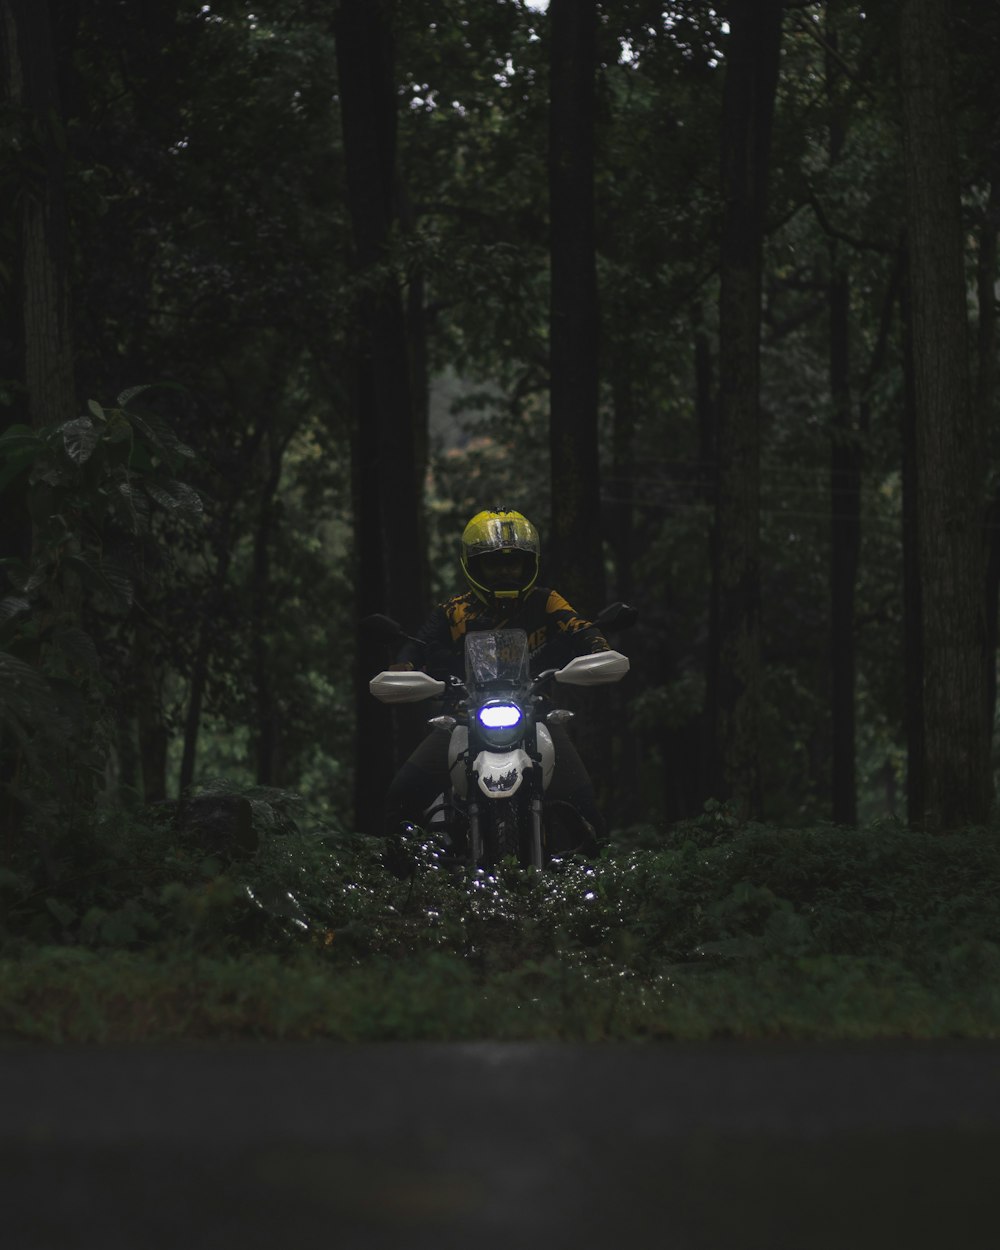 a person riding a motorcycle through a forest